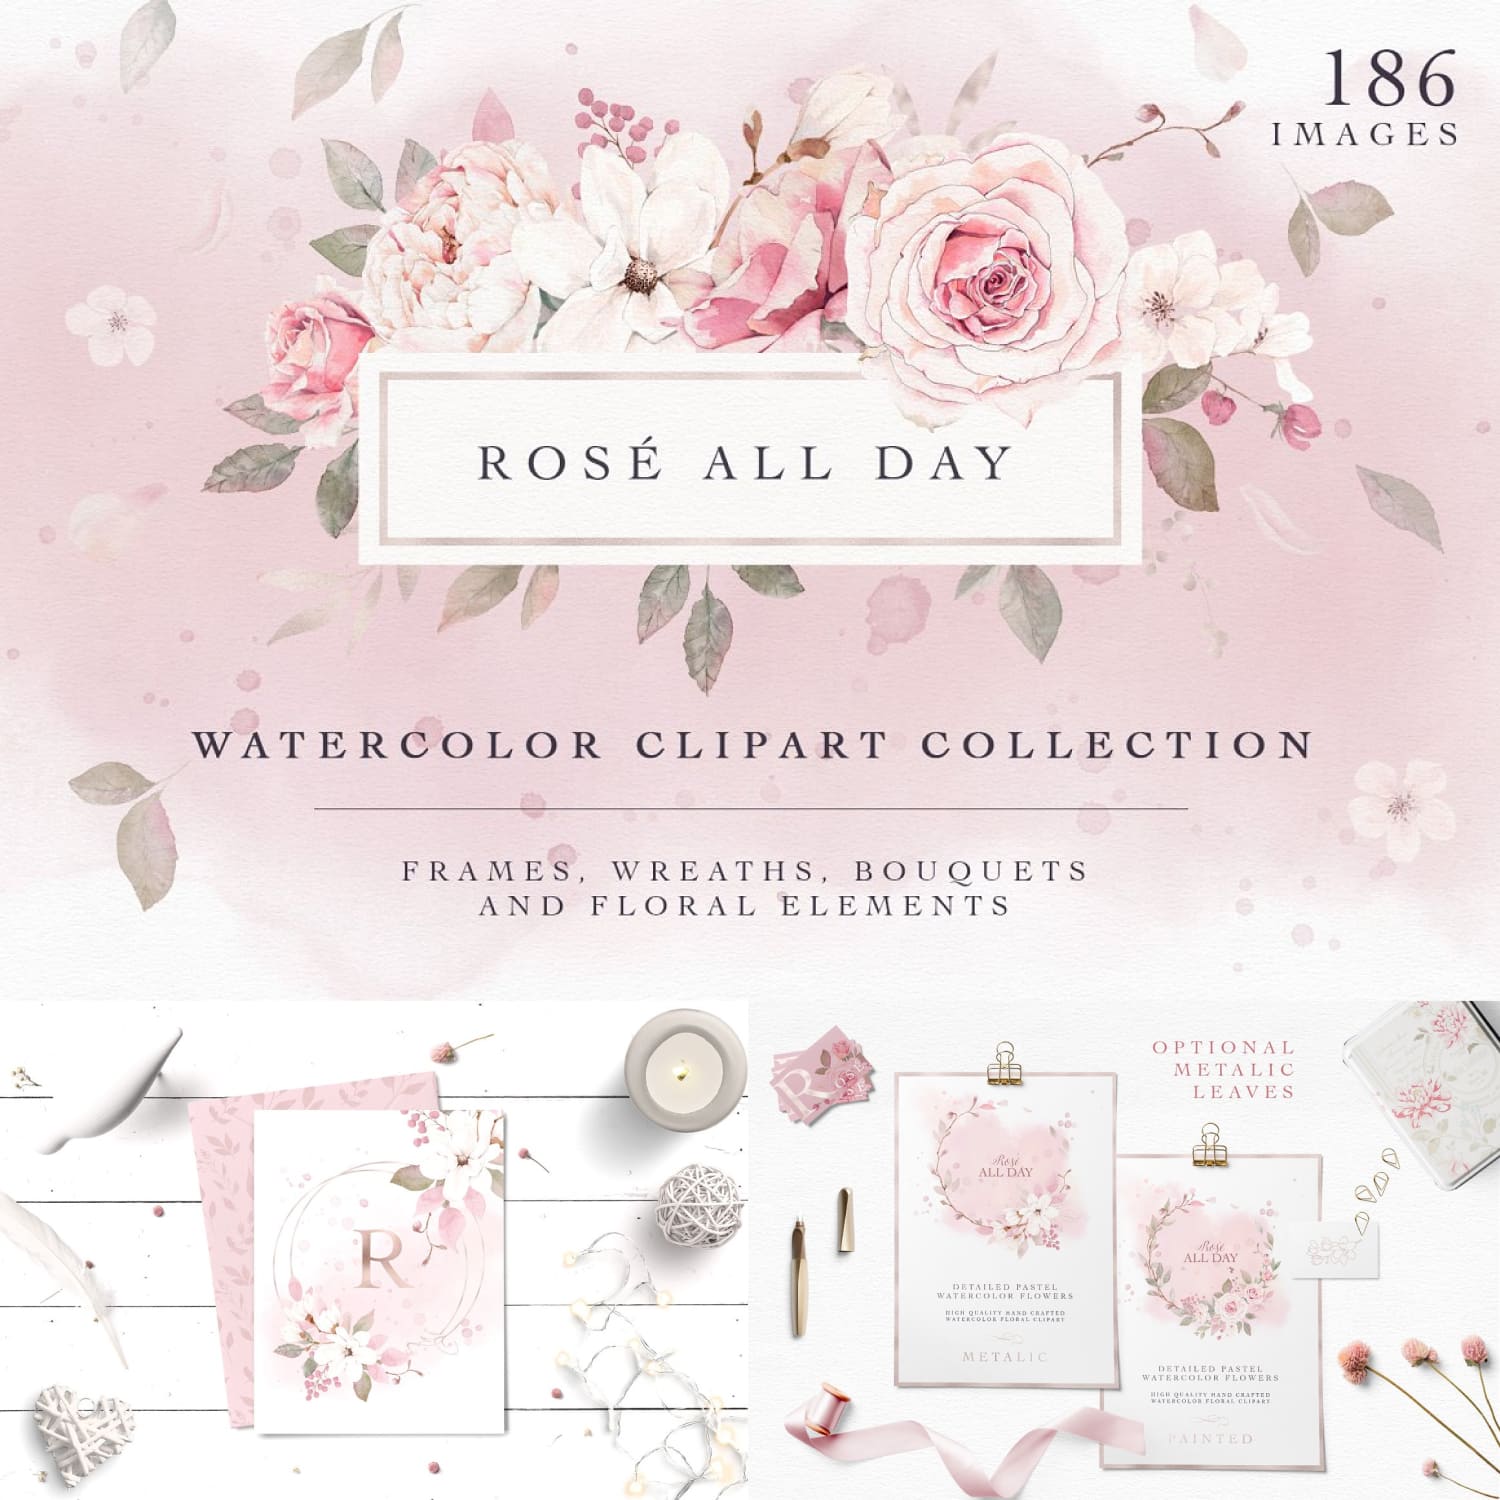 Pretty Pink Rose Watercolor Clipart.